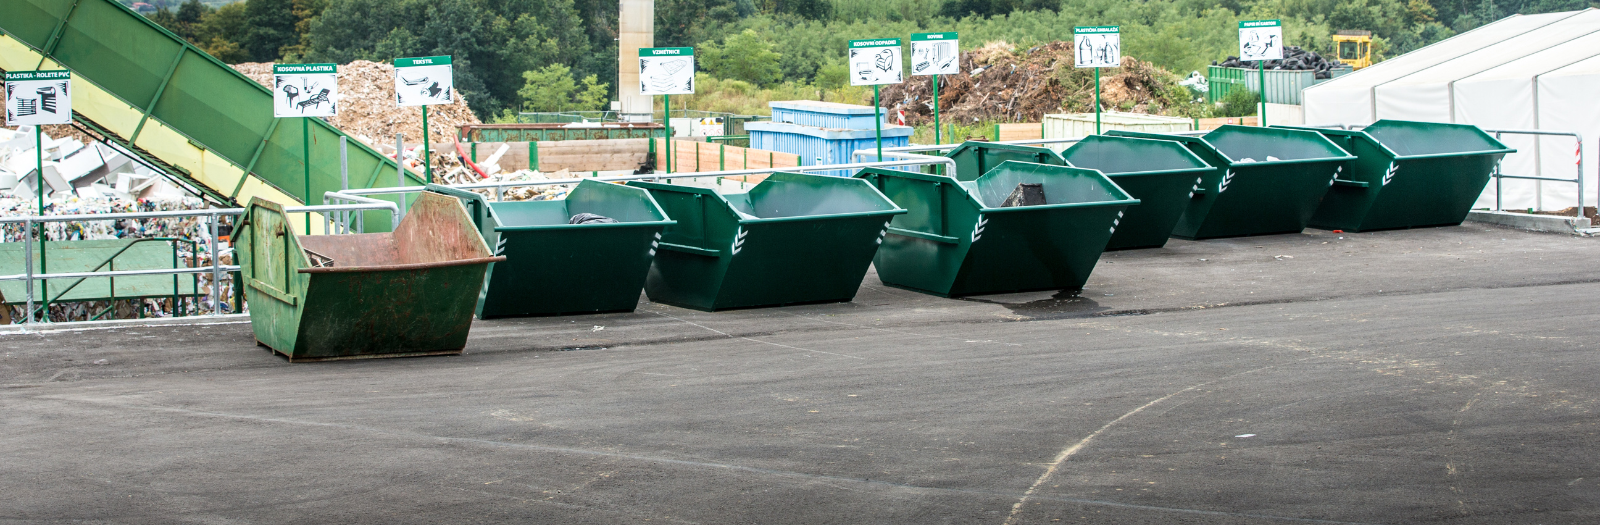 Green waste containers lined up